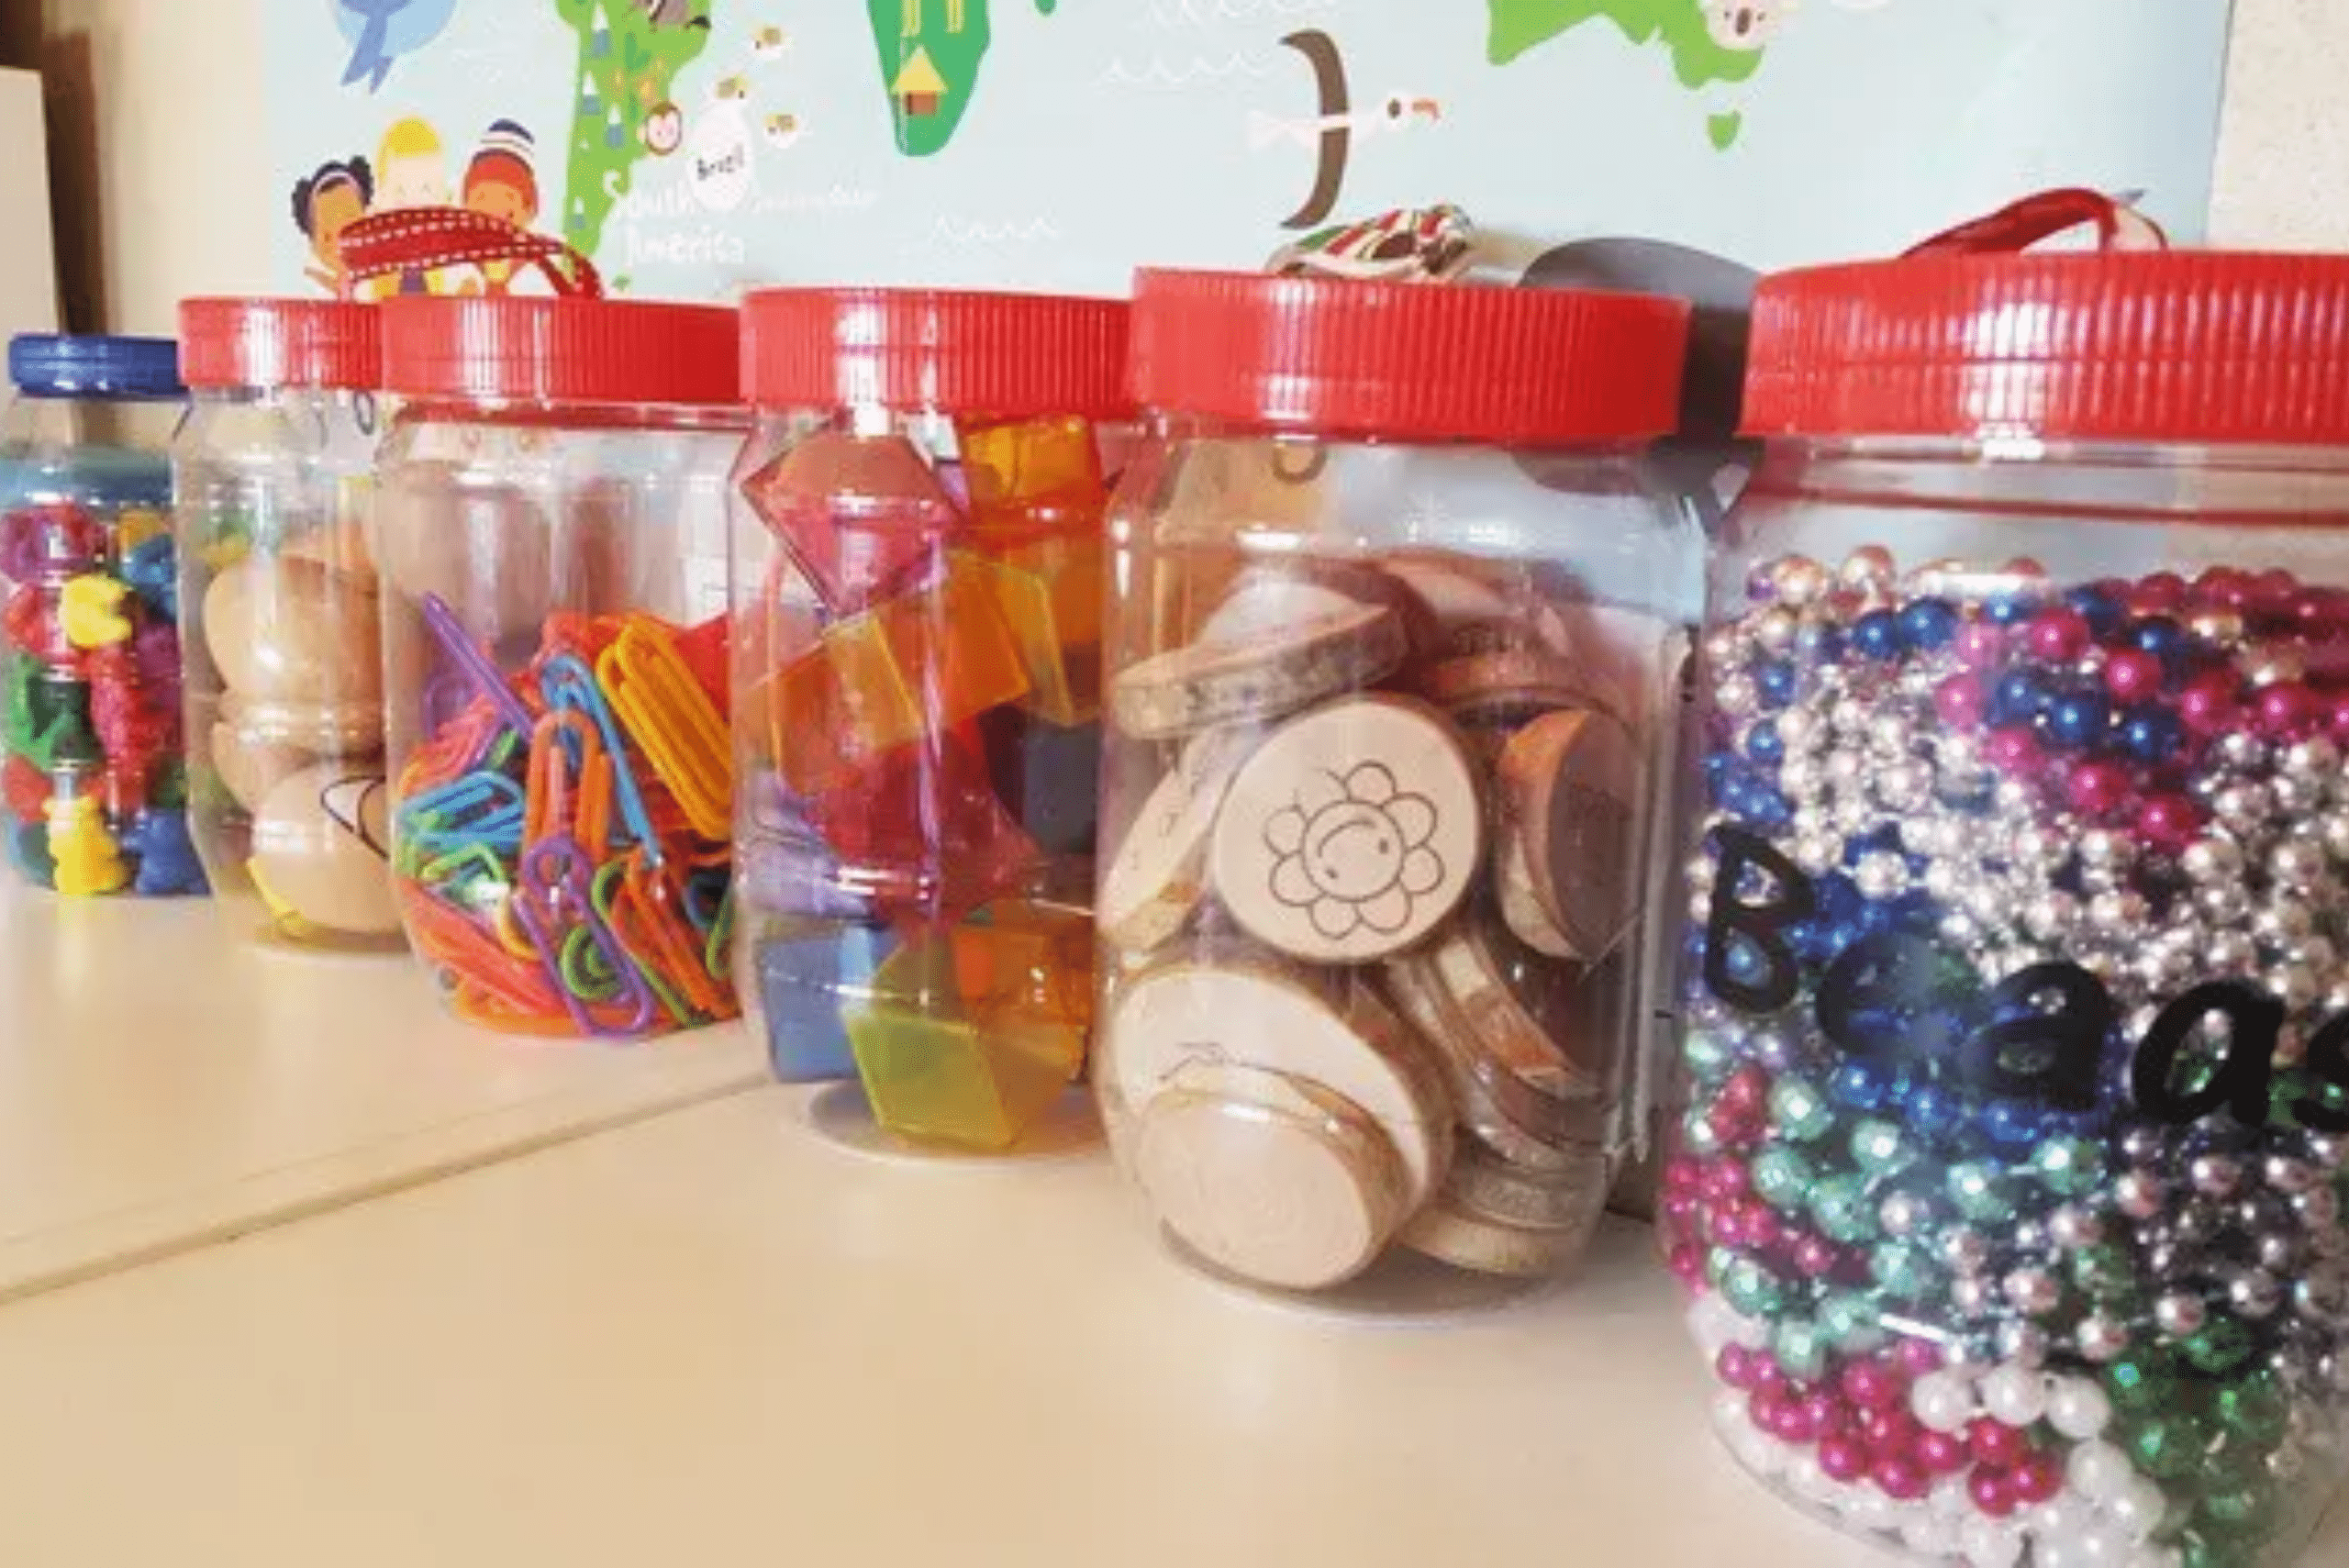 An assortment of peanut butter jars used as storage.